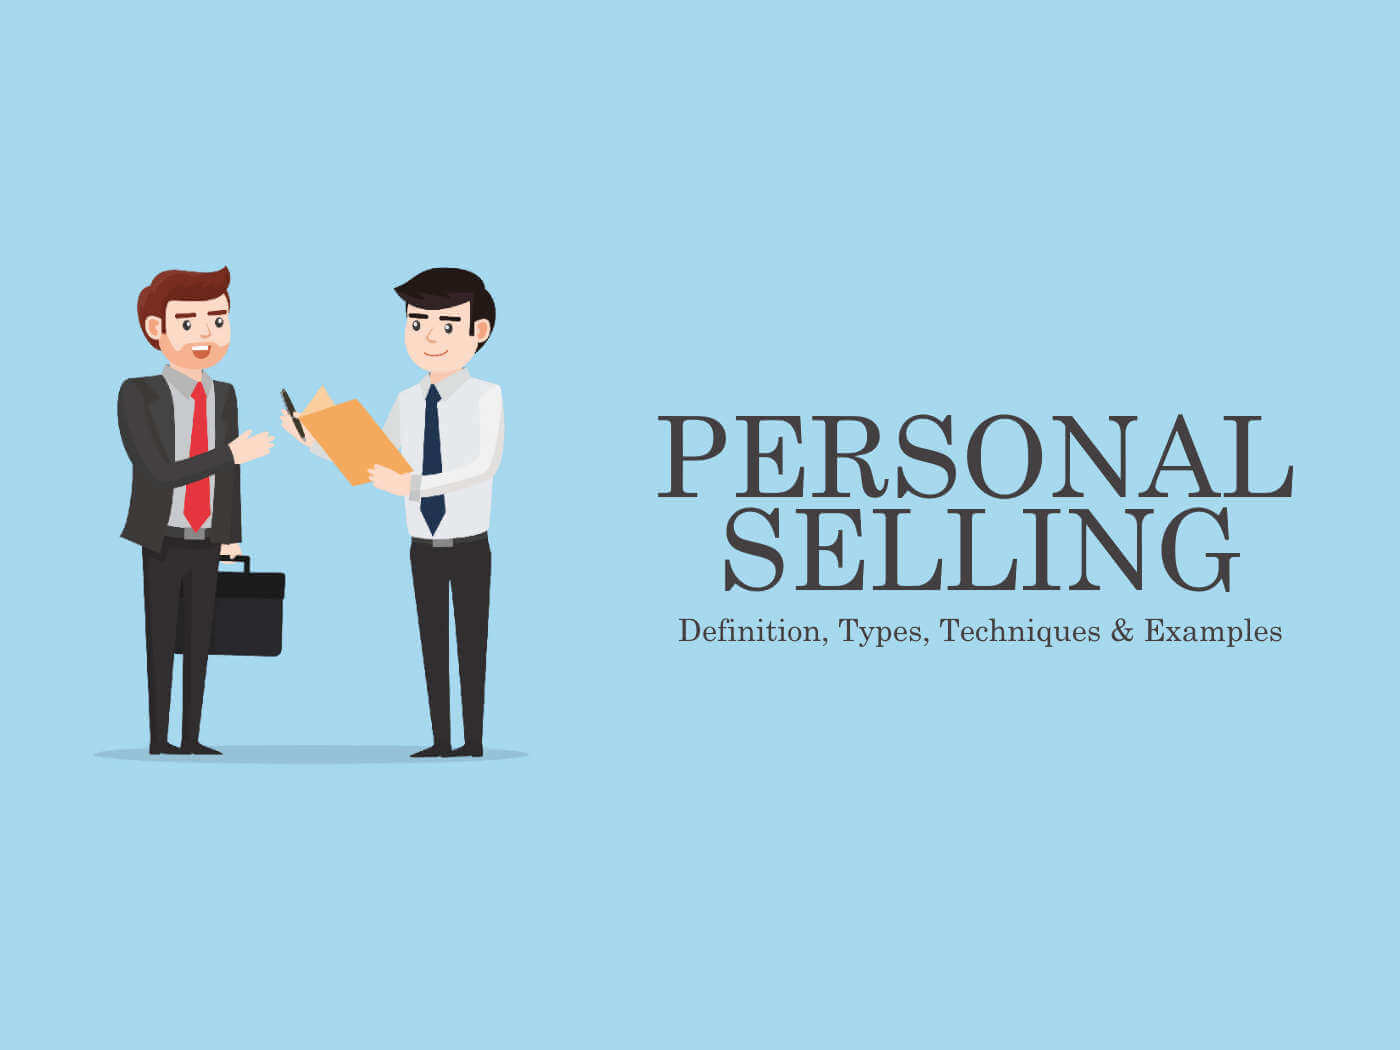 Personal Selling - Definition, Types, Techniques, Examples, Pros &amp; Cons